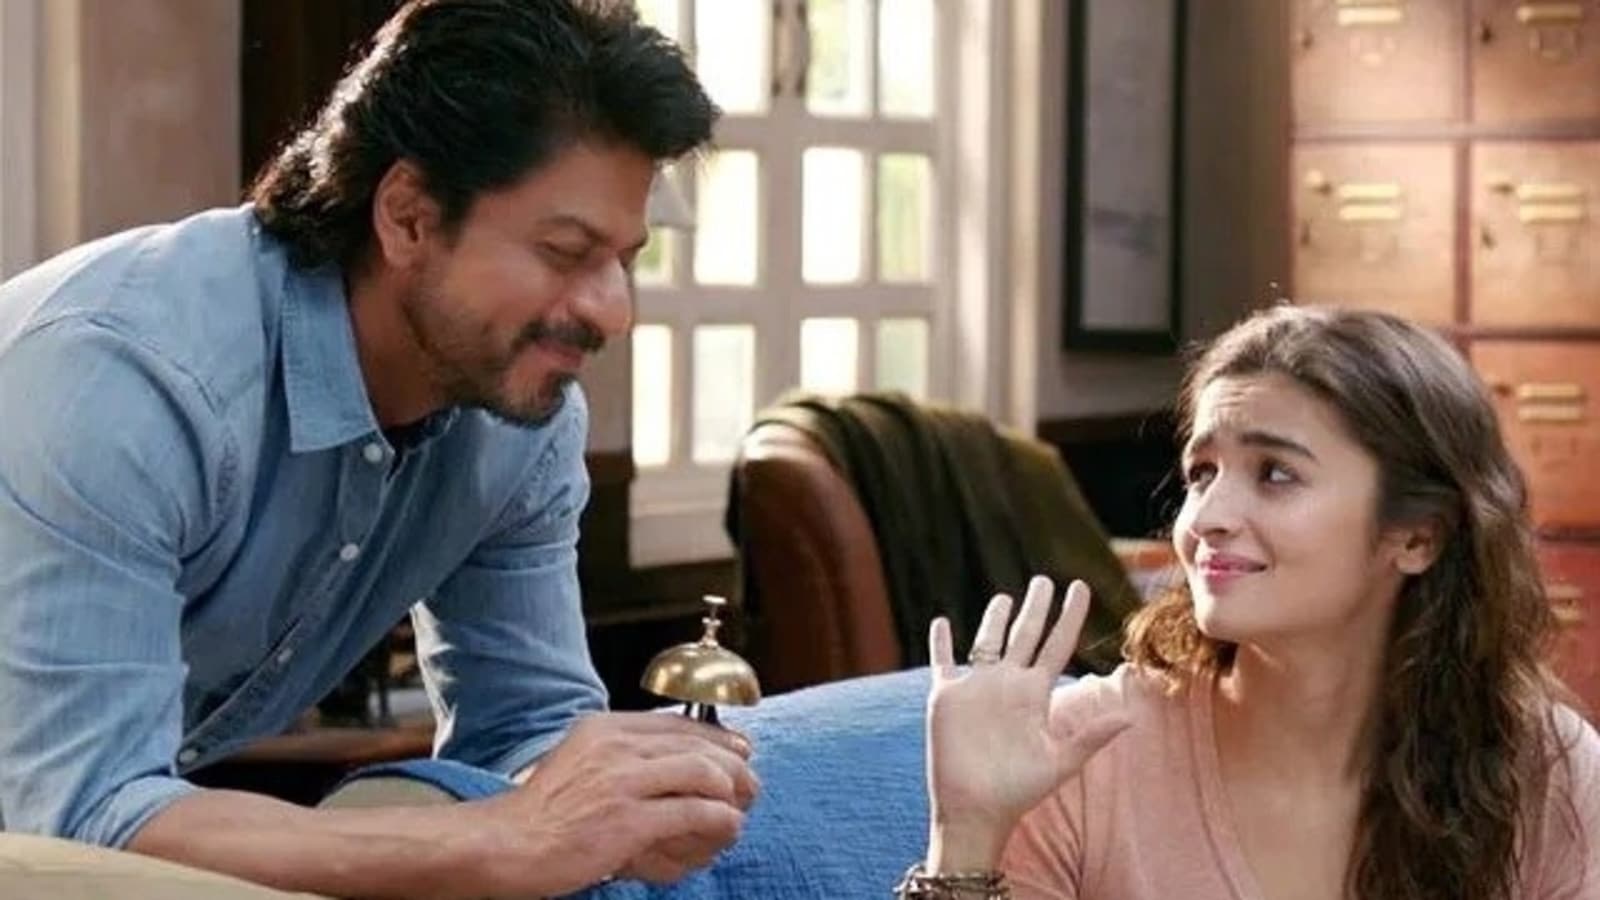 Alia Bhatt says her and Shah Rukh Khan can both get manicure and pedicure post Darlings release; here’s why